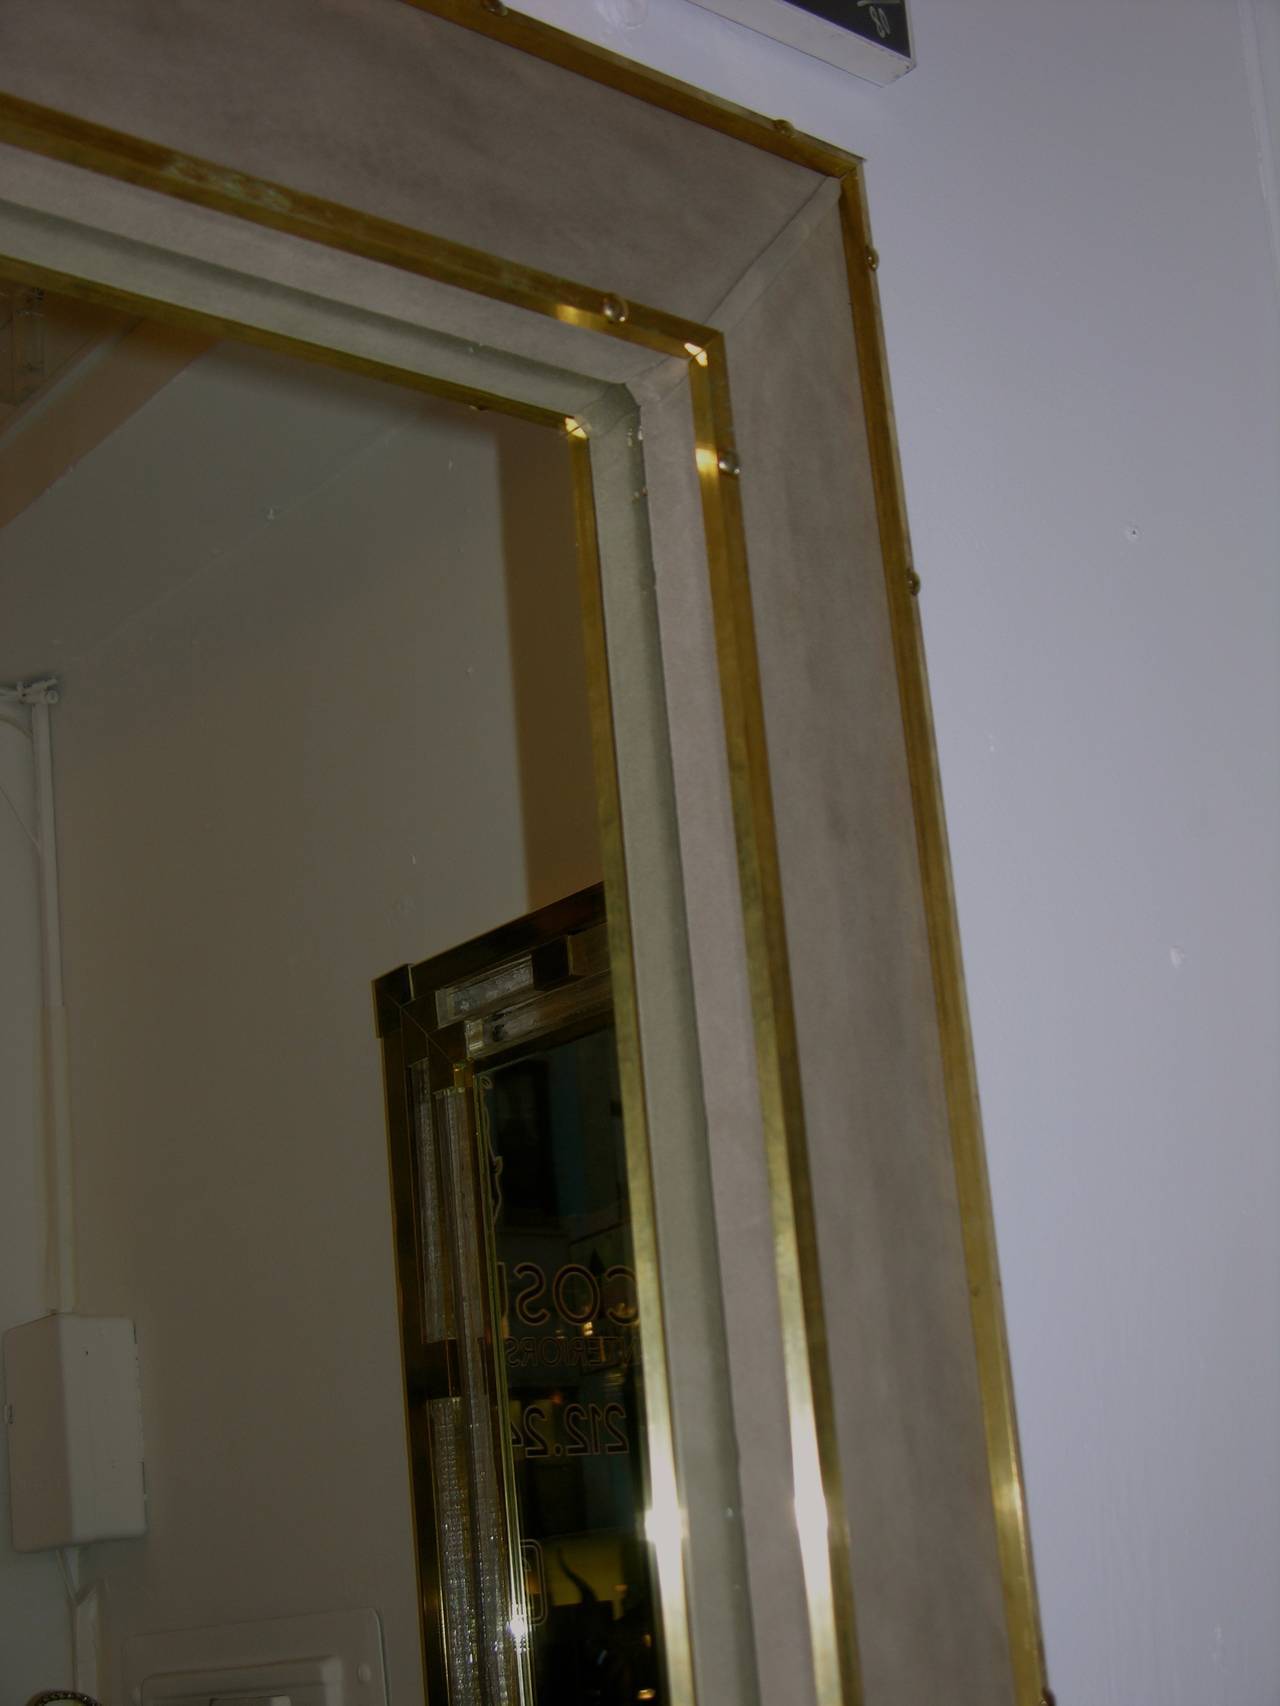 Late 20th Century 1970s Italian Suede Leather Floor Mirror with Modern Bronze Accents